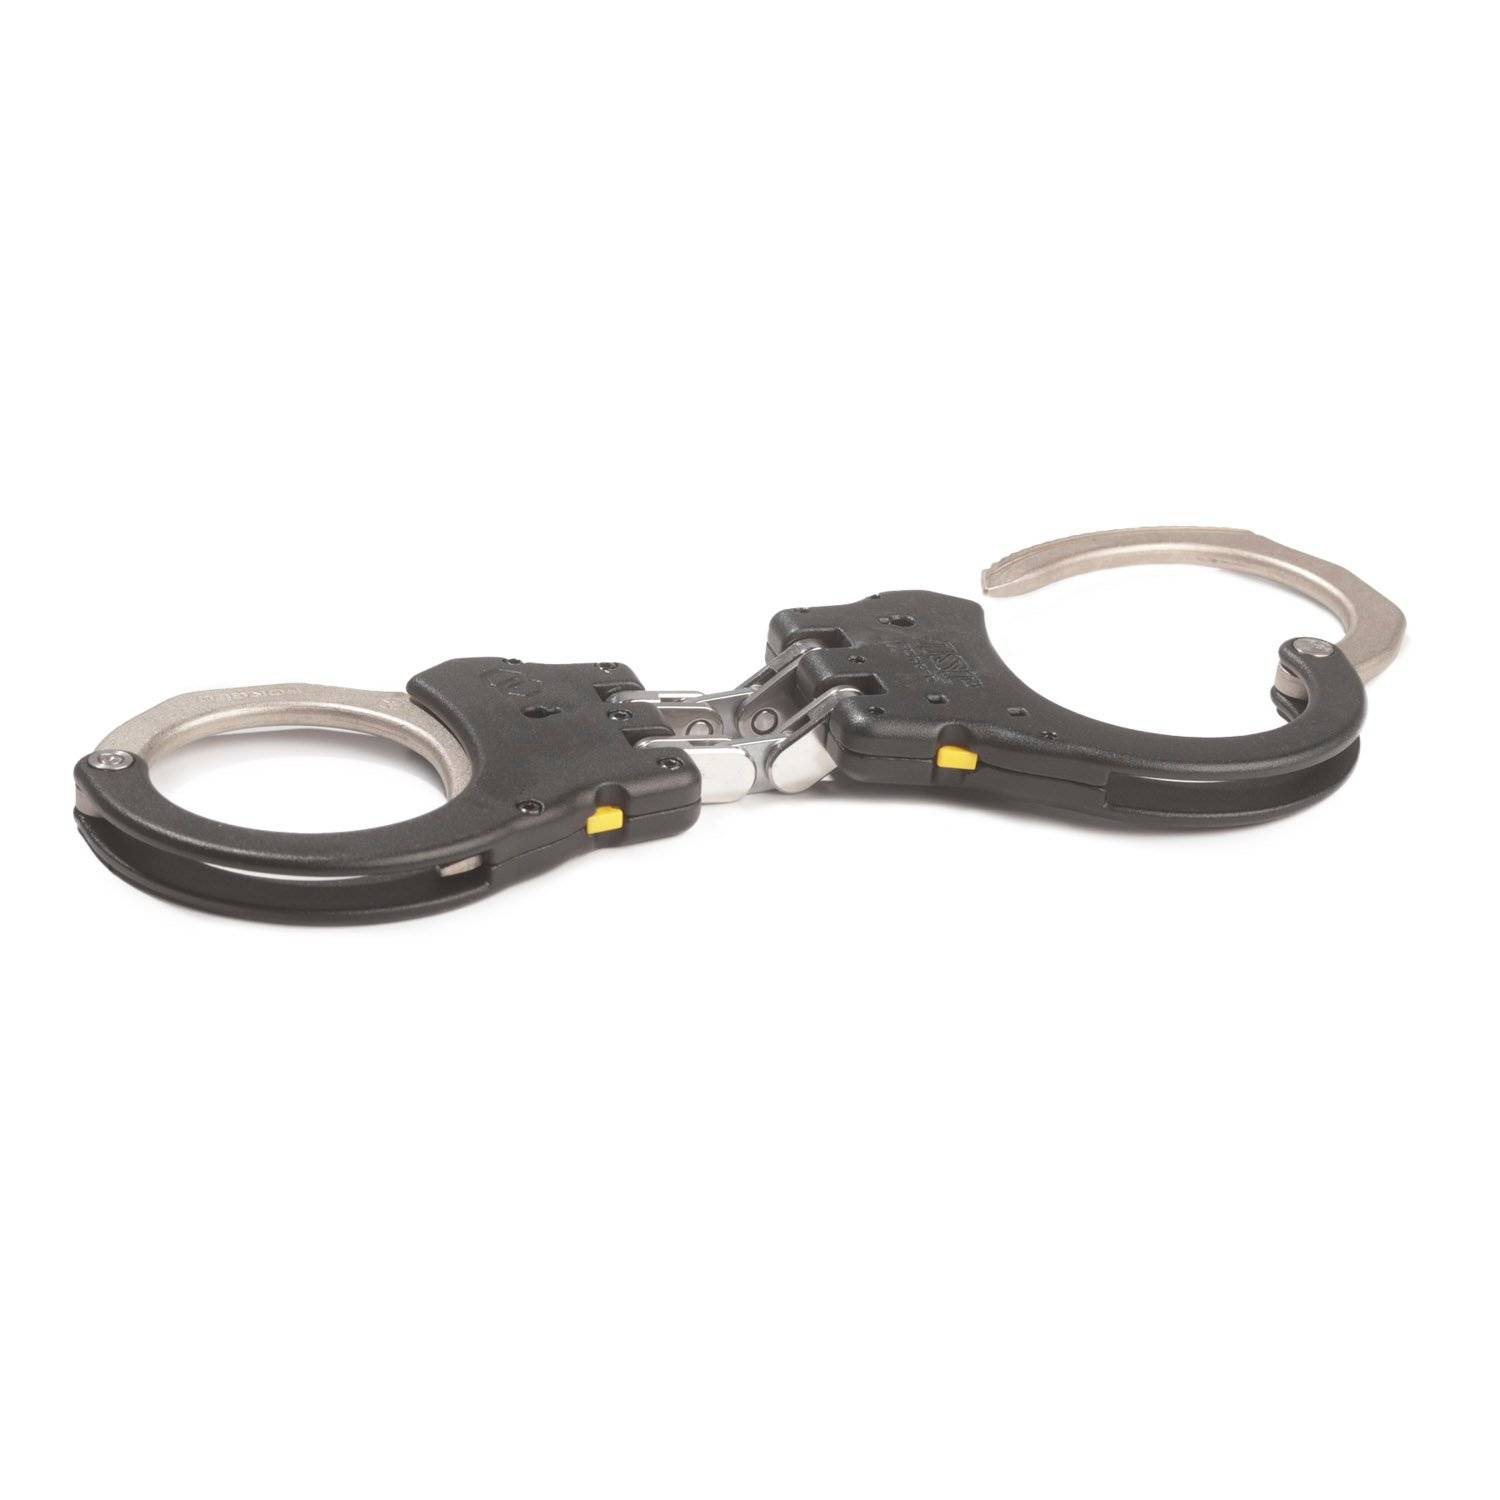 ASP Ultra Plus Hinged Handcuffs (Steel Bow)